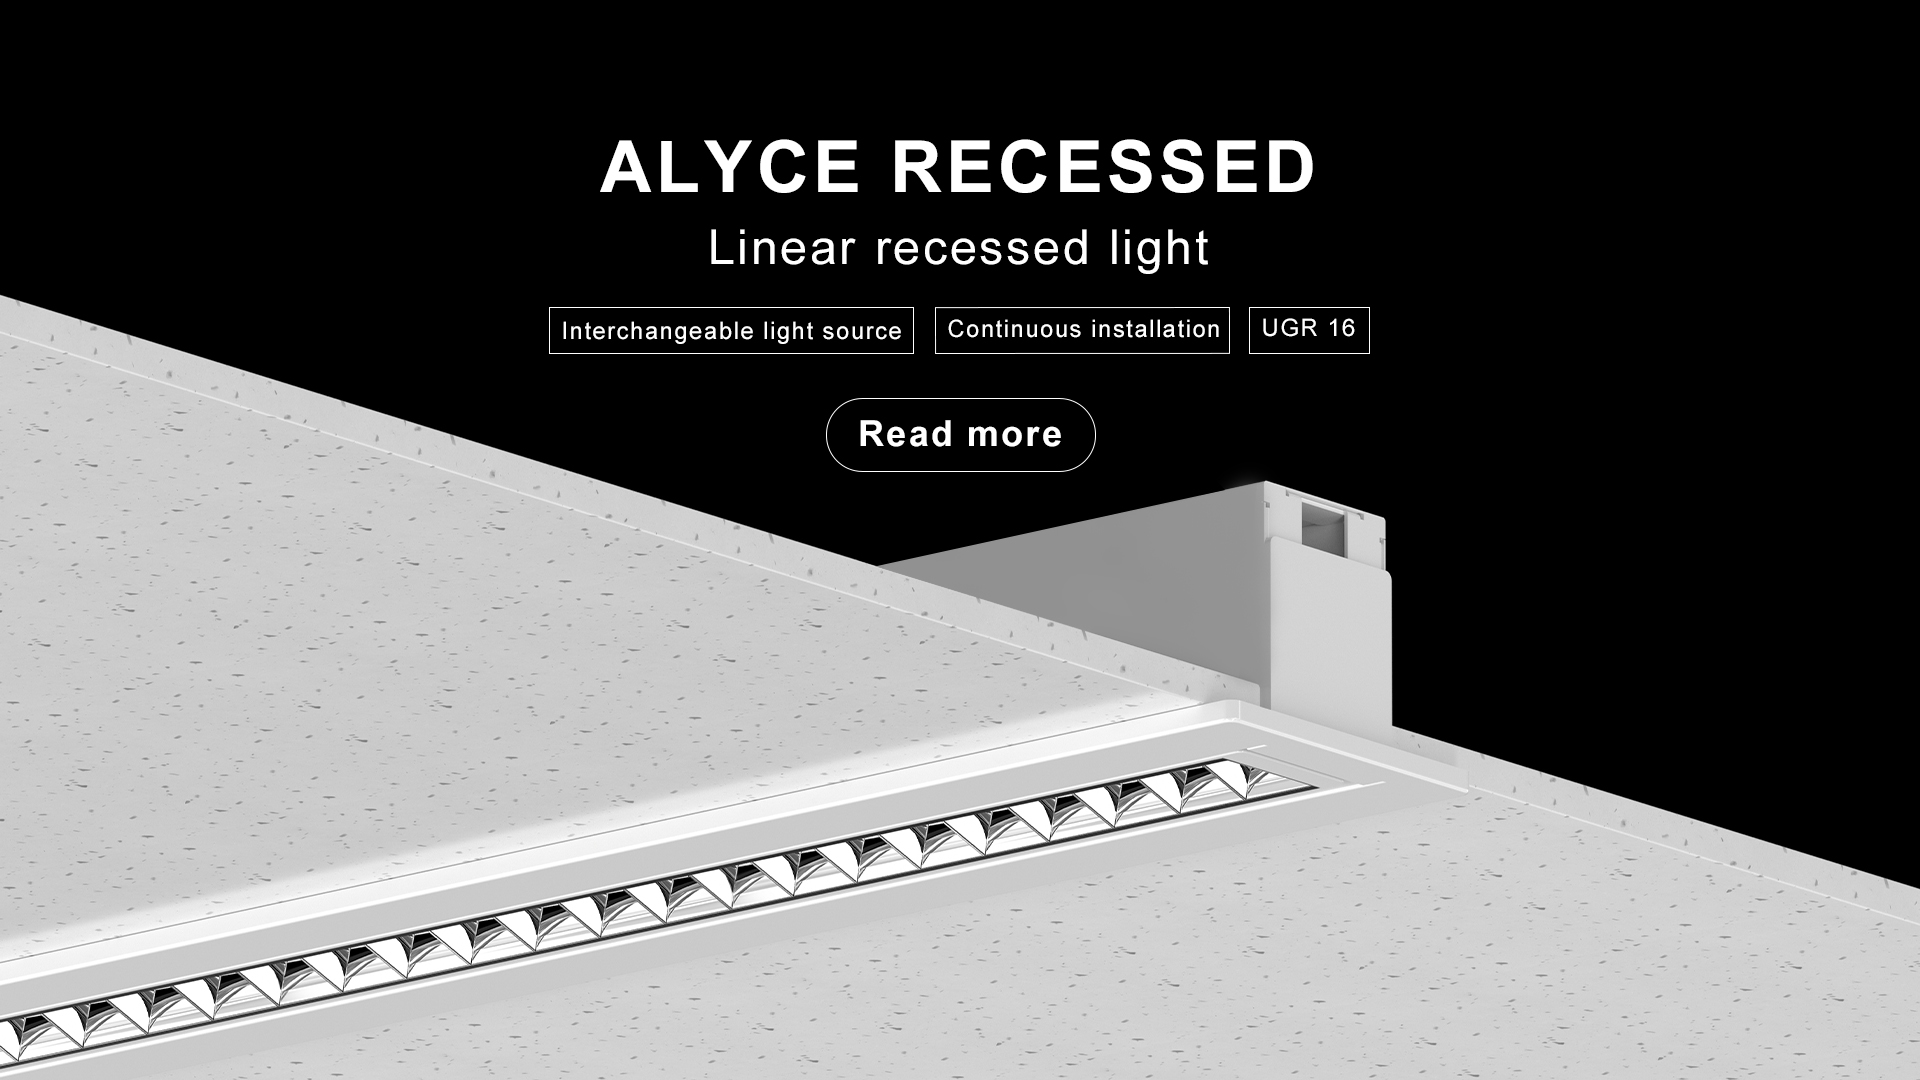 LED Linear Trunking System Market Analysis 2023: Industry Update, Regional Outlook and Forecast to 2030  - Benzinga